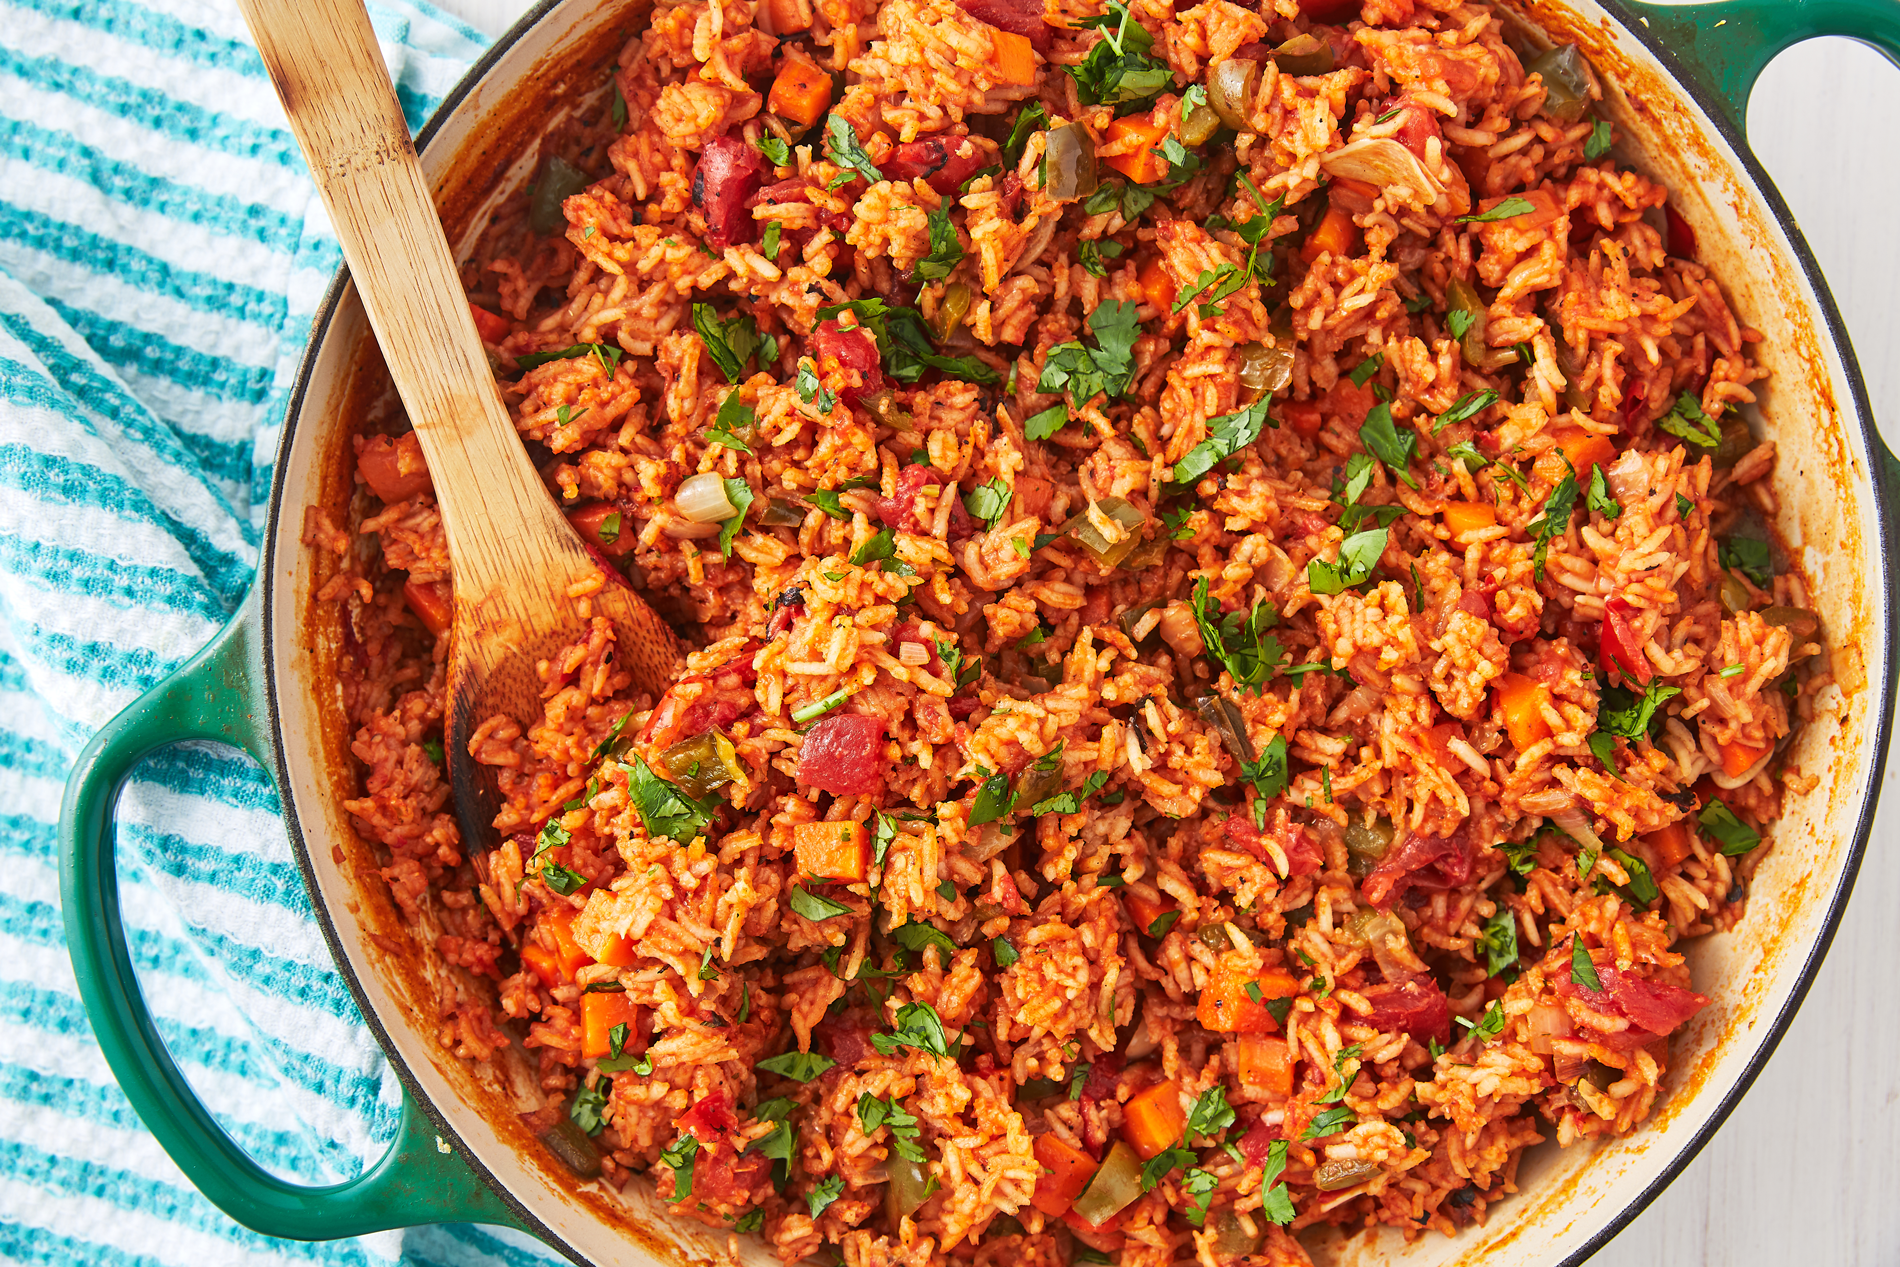 Best Mexican Rice Recipe - How To Make Mexican Rice